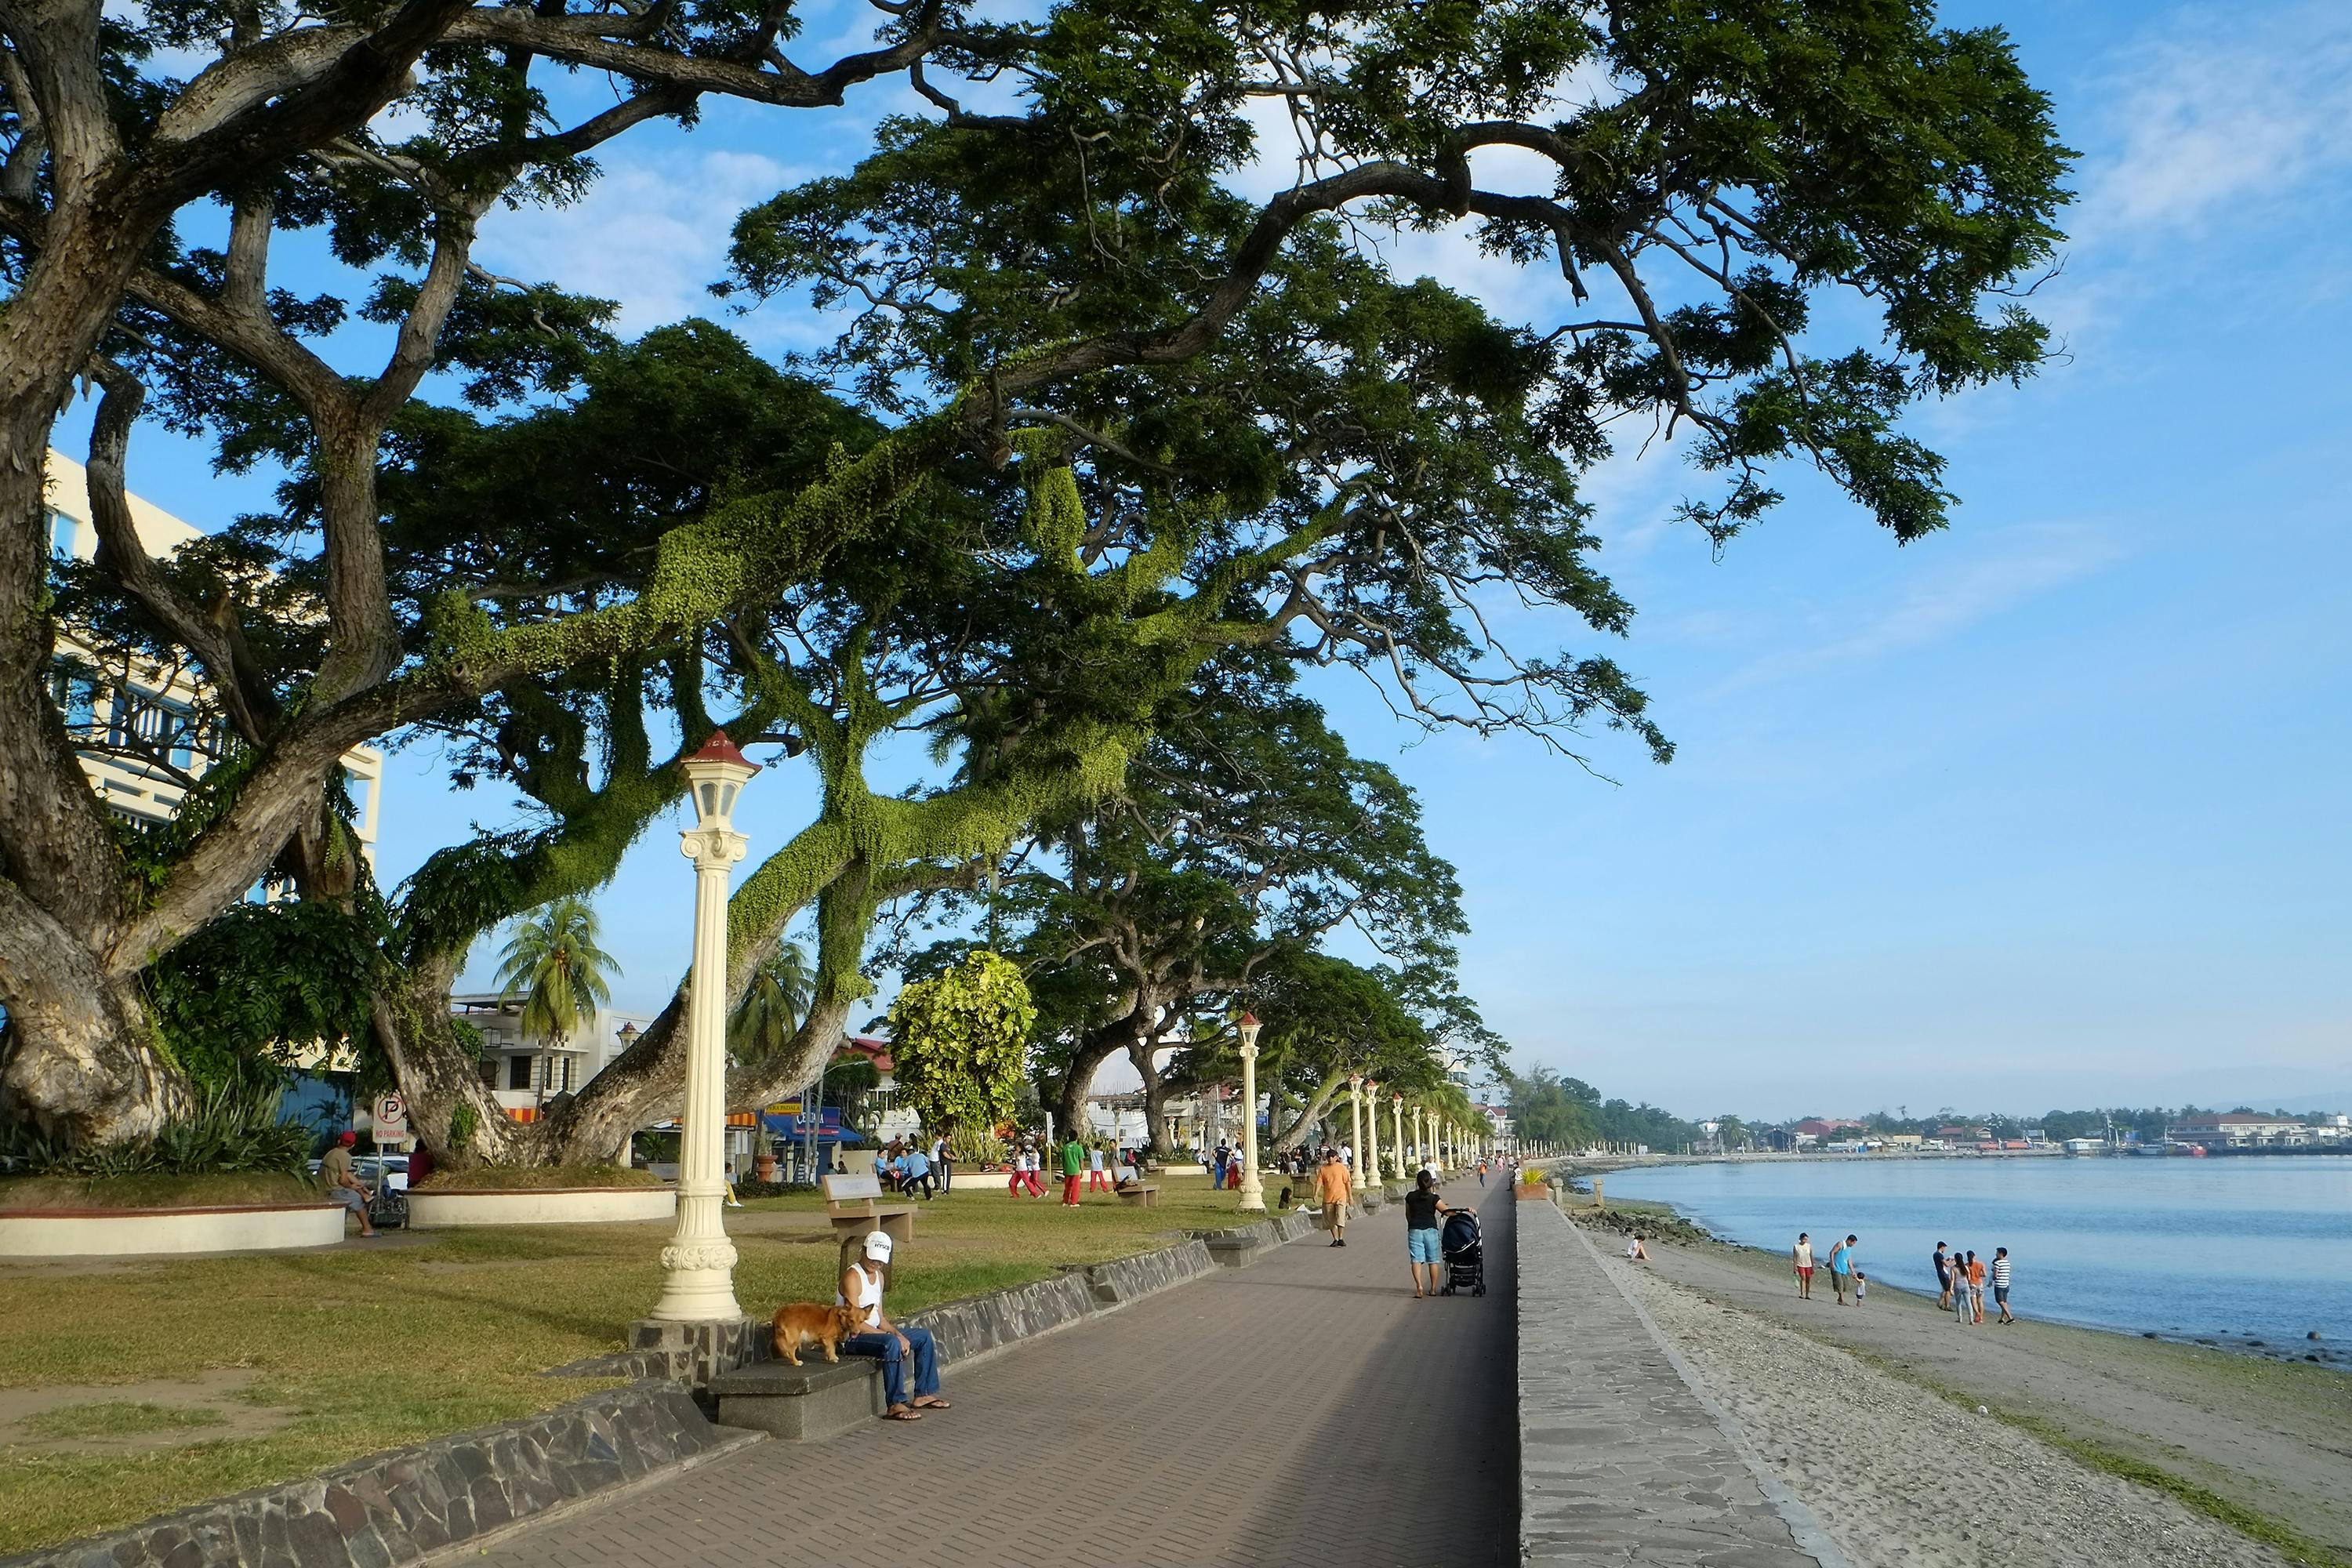 Rizal Boulevard is the perfect spot to watch the view in Dumaguete